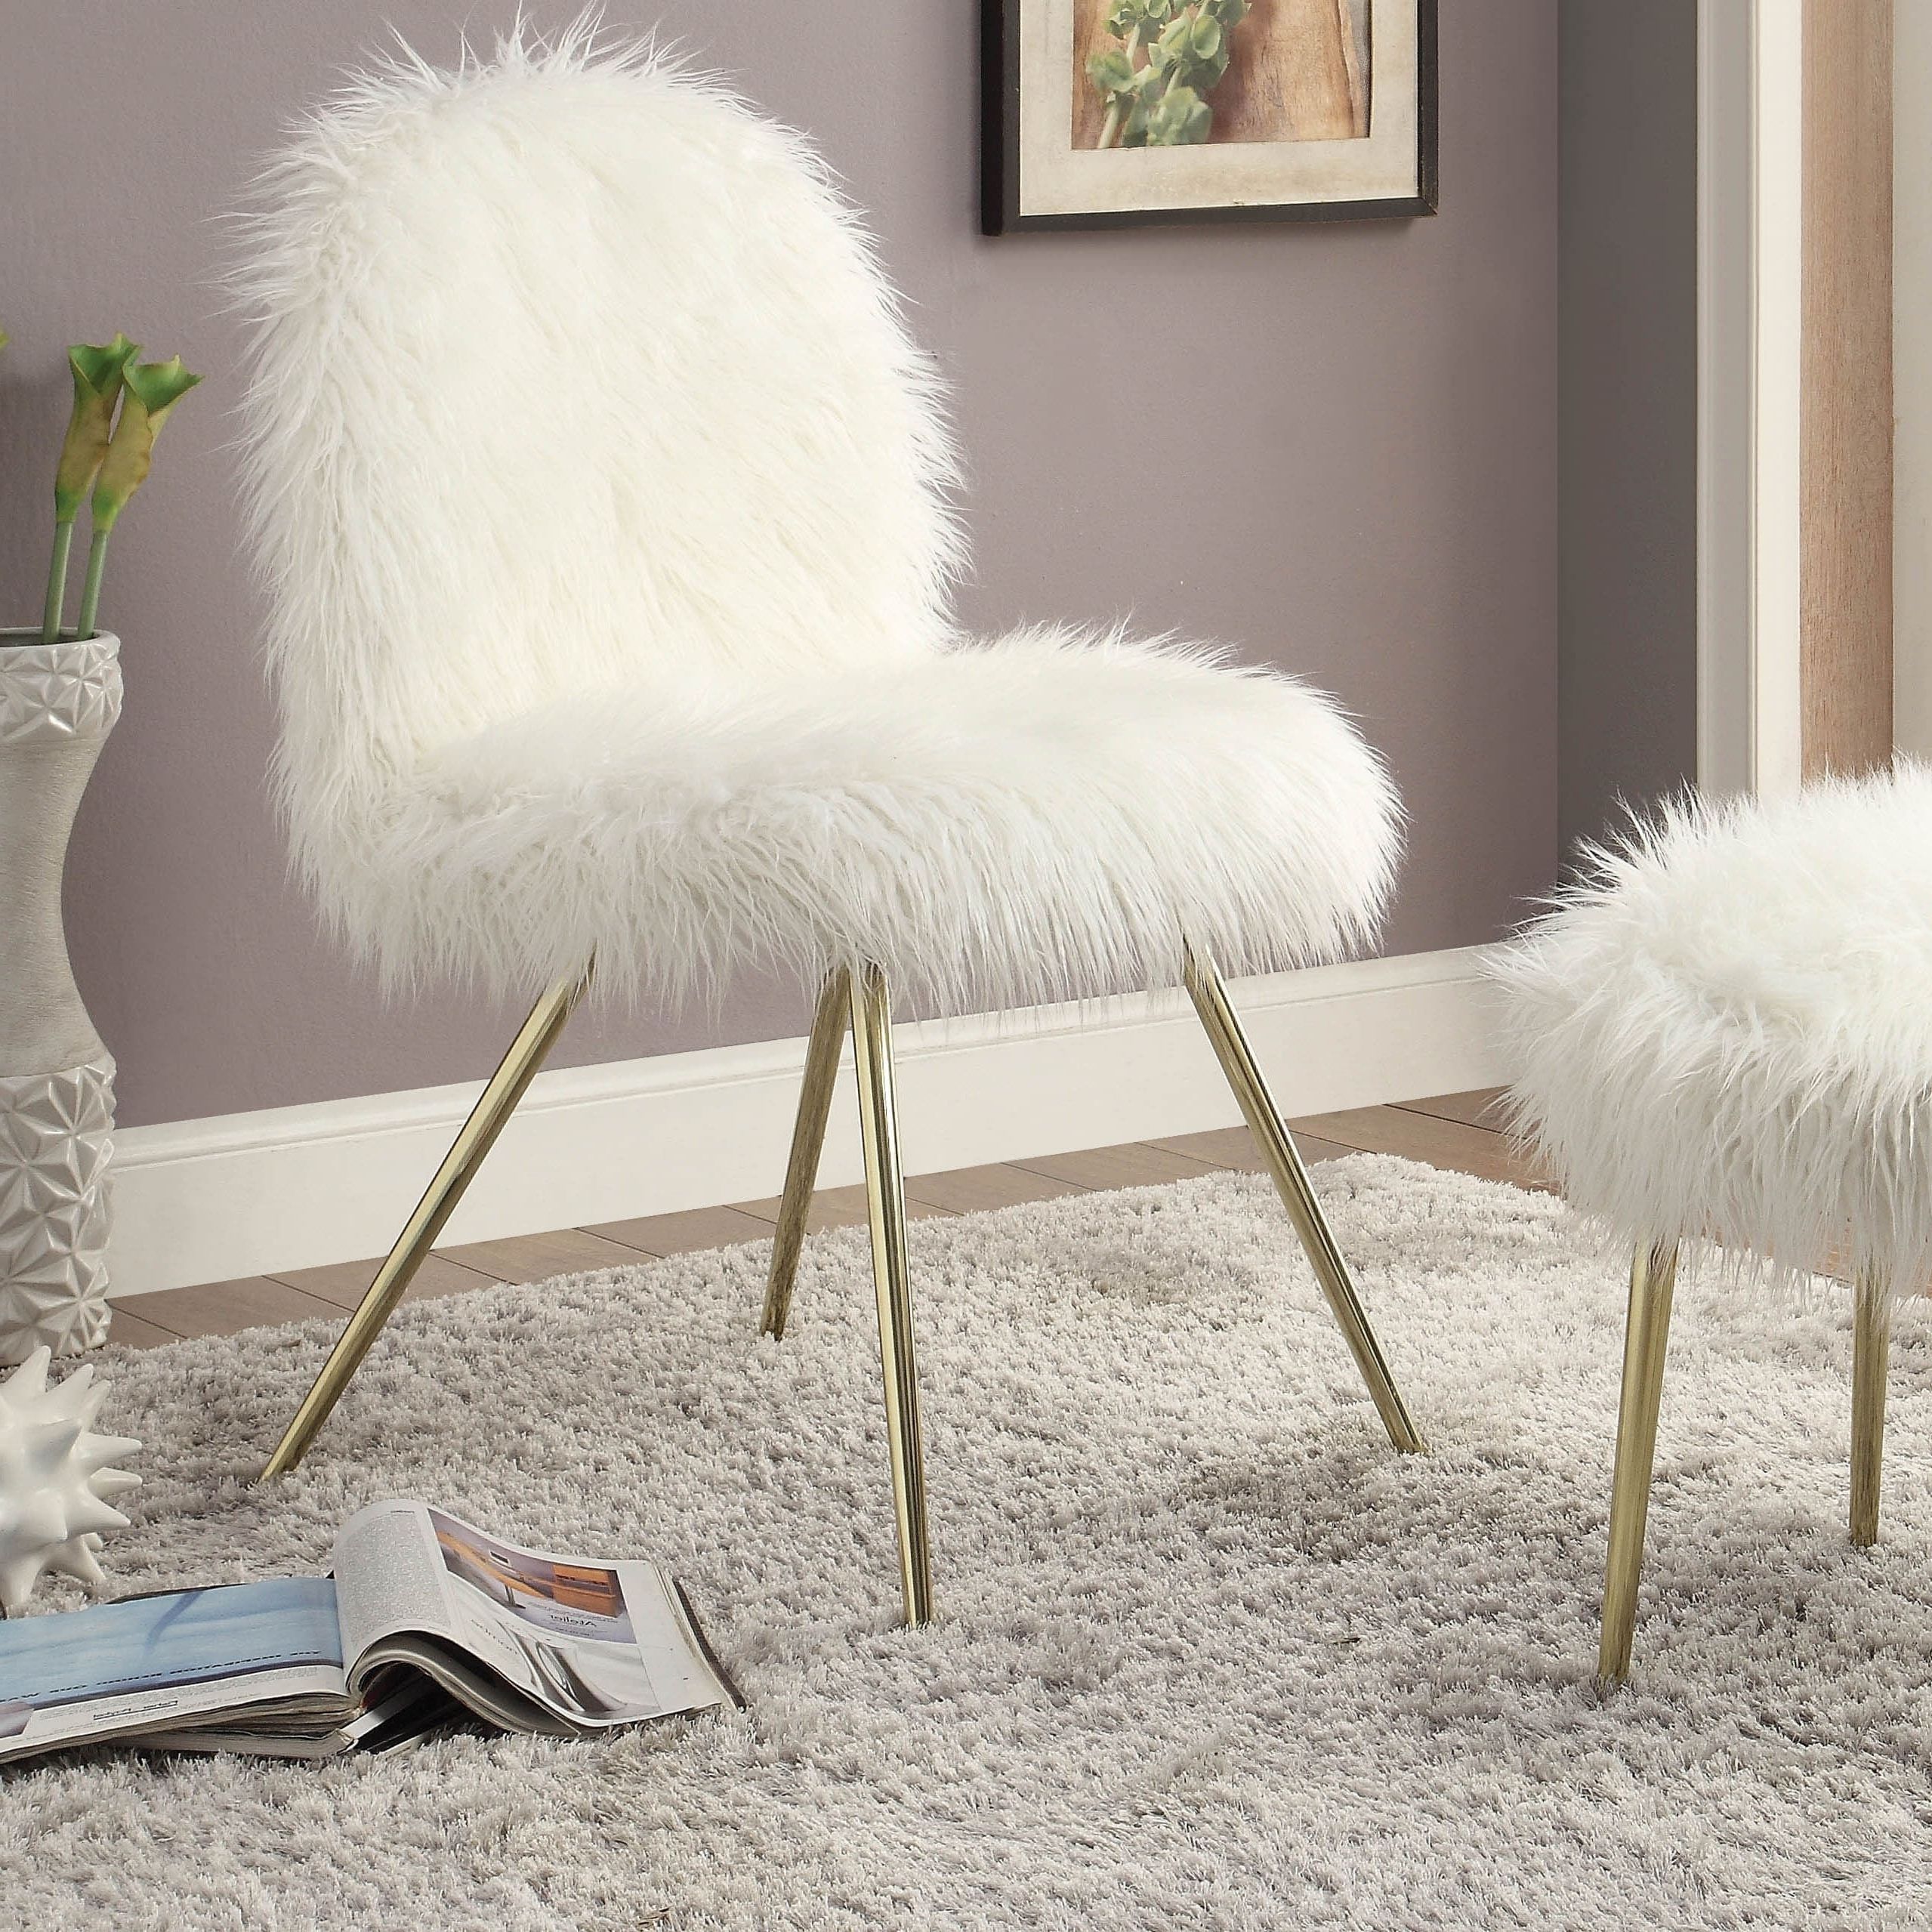 Most Up To Date White Faux Fur Round Accent Stools With Storage In White Fluffy Chair (View 8 of 10)